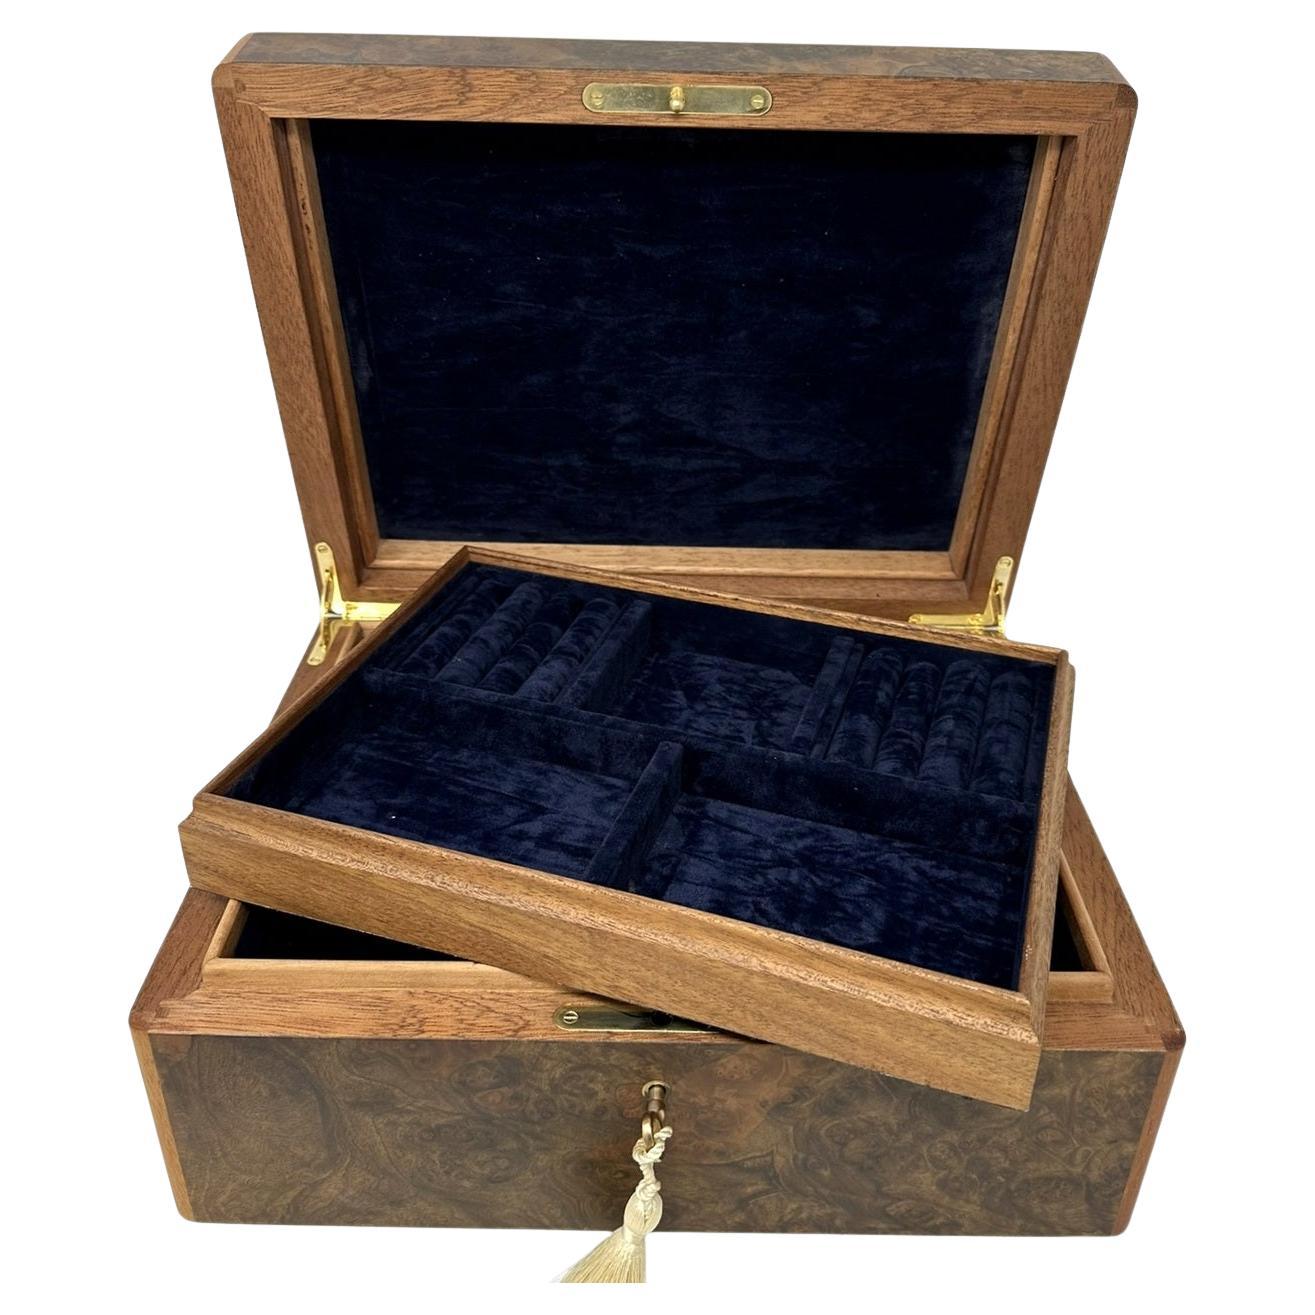 This walnut jewellery casket was manufactured by the famed manning of Ireland company and is truly a jewel of handcrafted genius. This box is constructed of the finest woods available and the knowledge and skill of 4 generations of box making in the